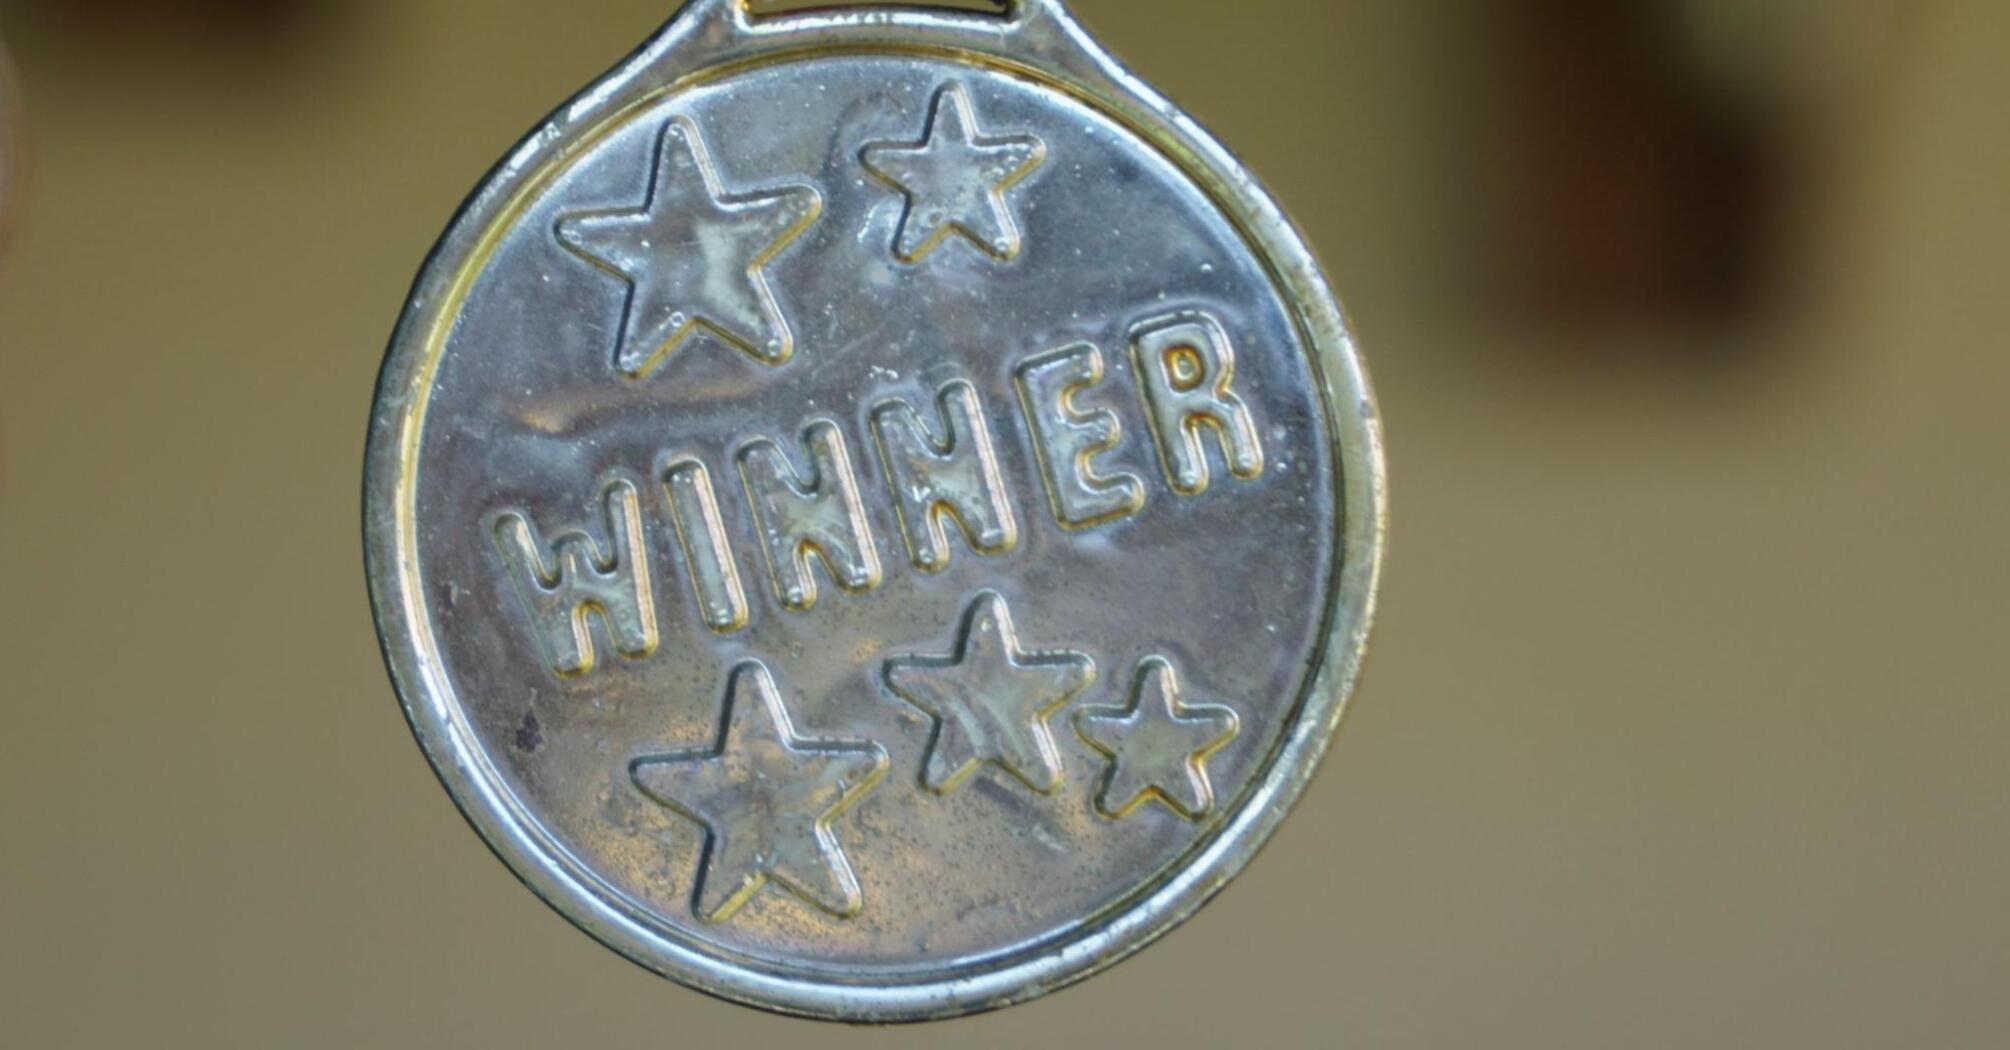 Medal with the inscription “Winner”